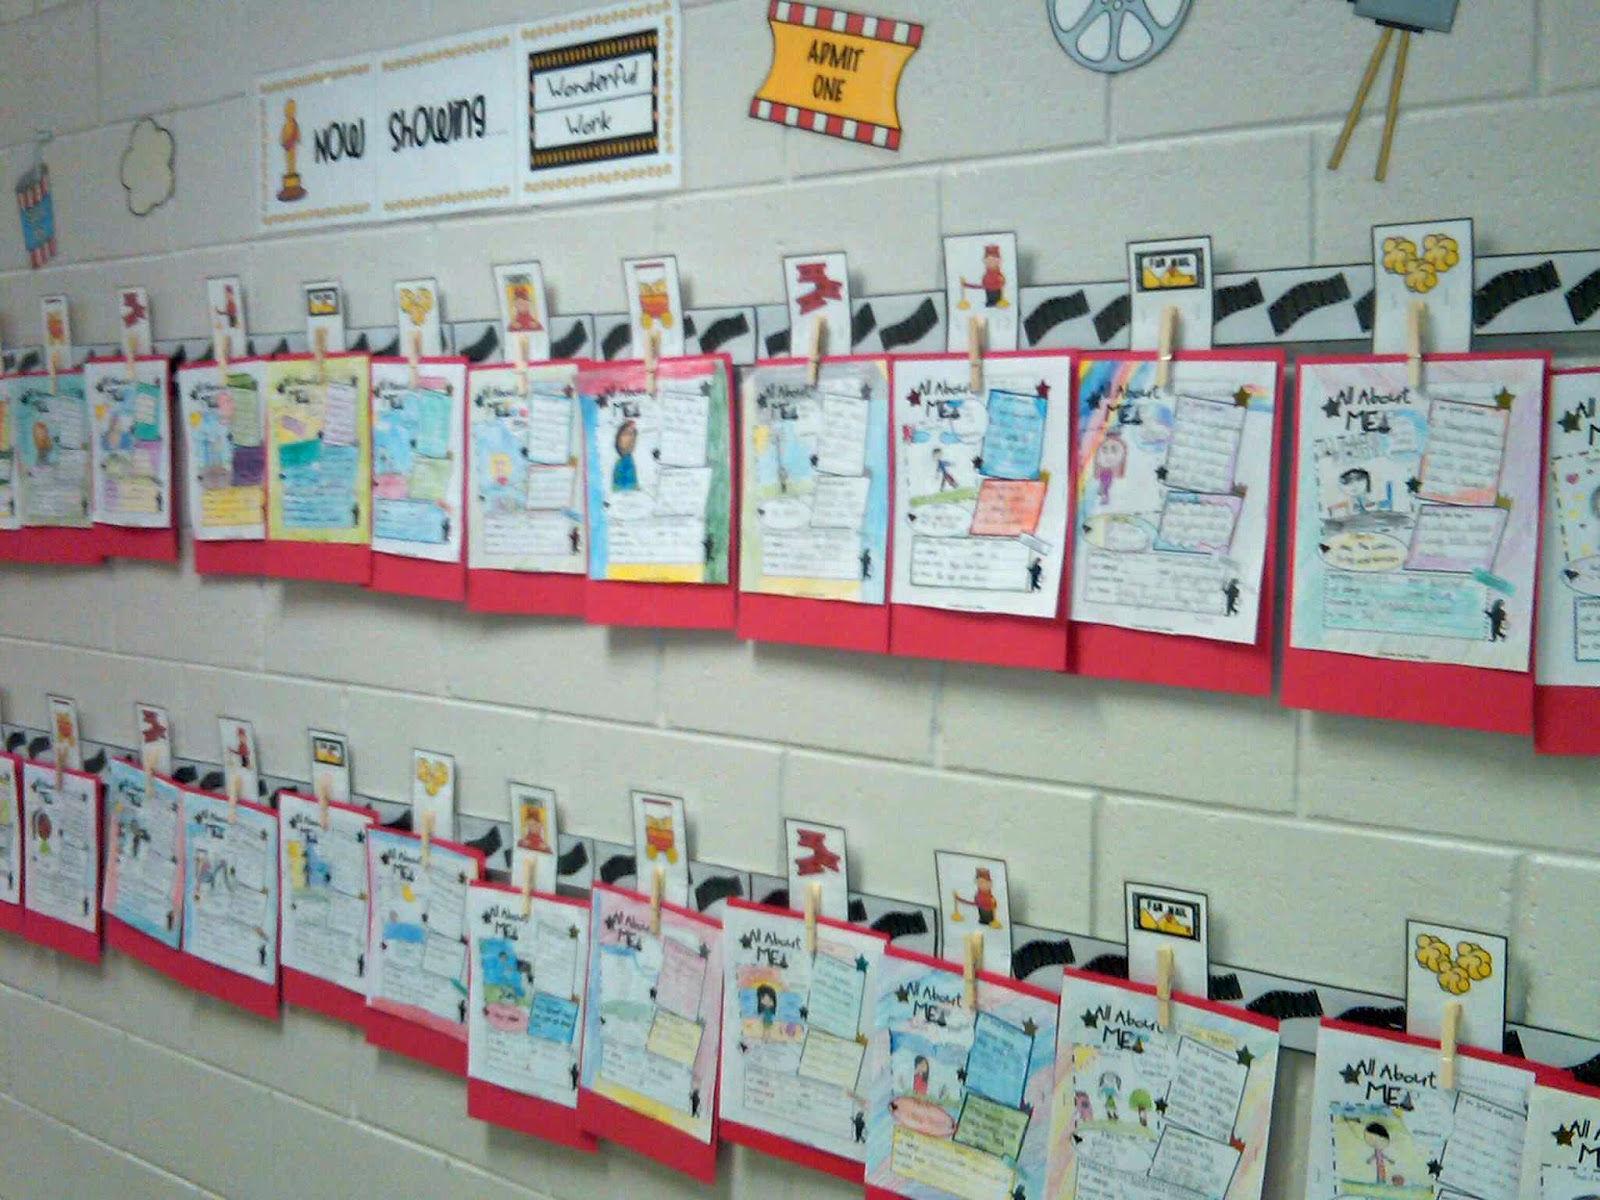 all-about-me-poster-classroom-activities-social-studies-reading